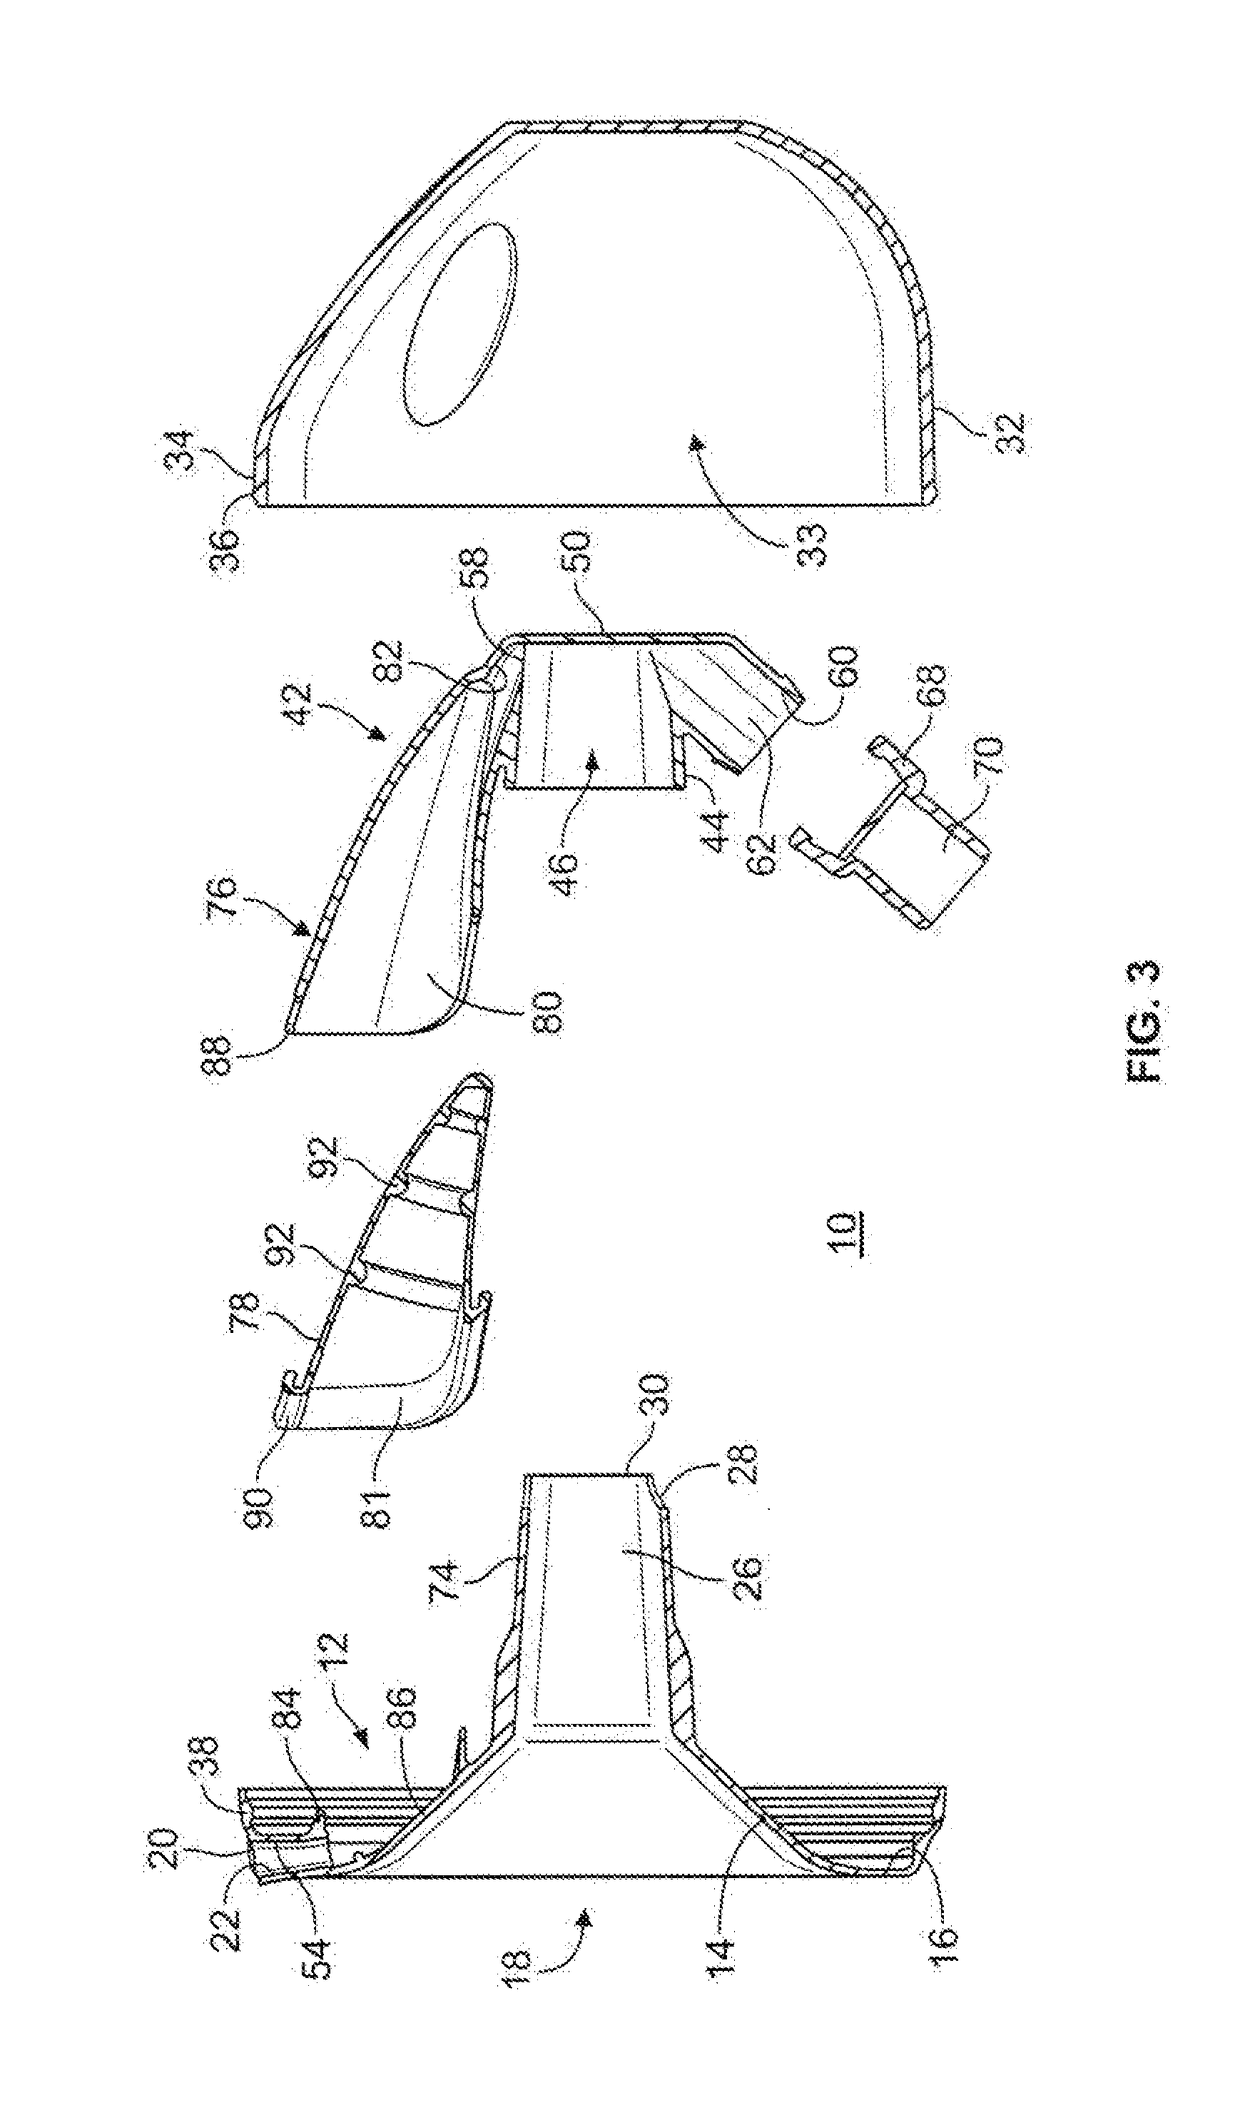 Submersible Breast Pump Protection Mechanism for a Breast Milk Collection Device with Self-Contained Reservoir